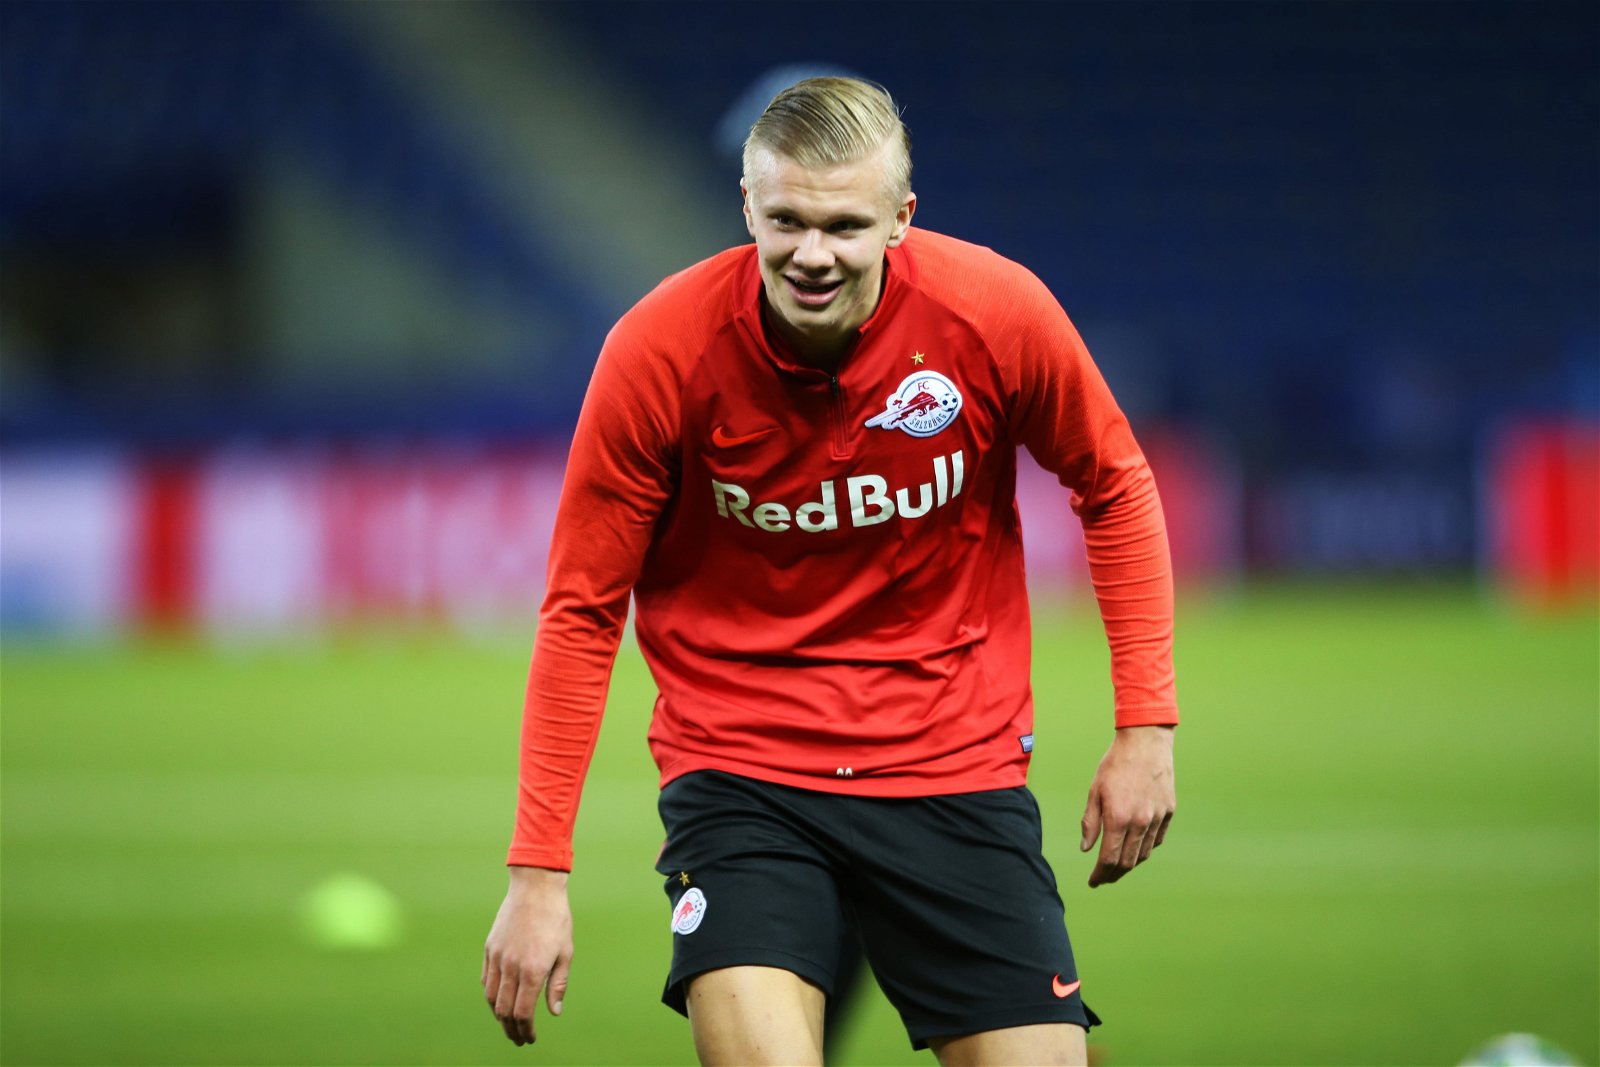 Manchester United firm favorites to land Erling Haaland